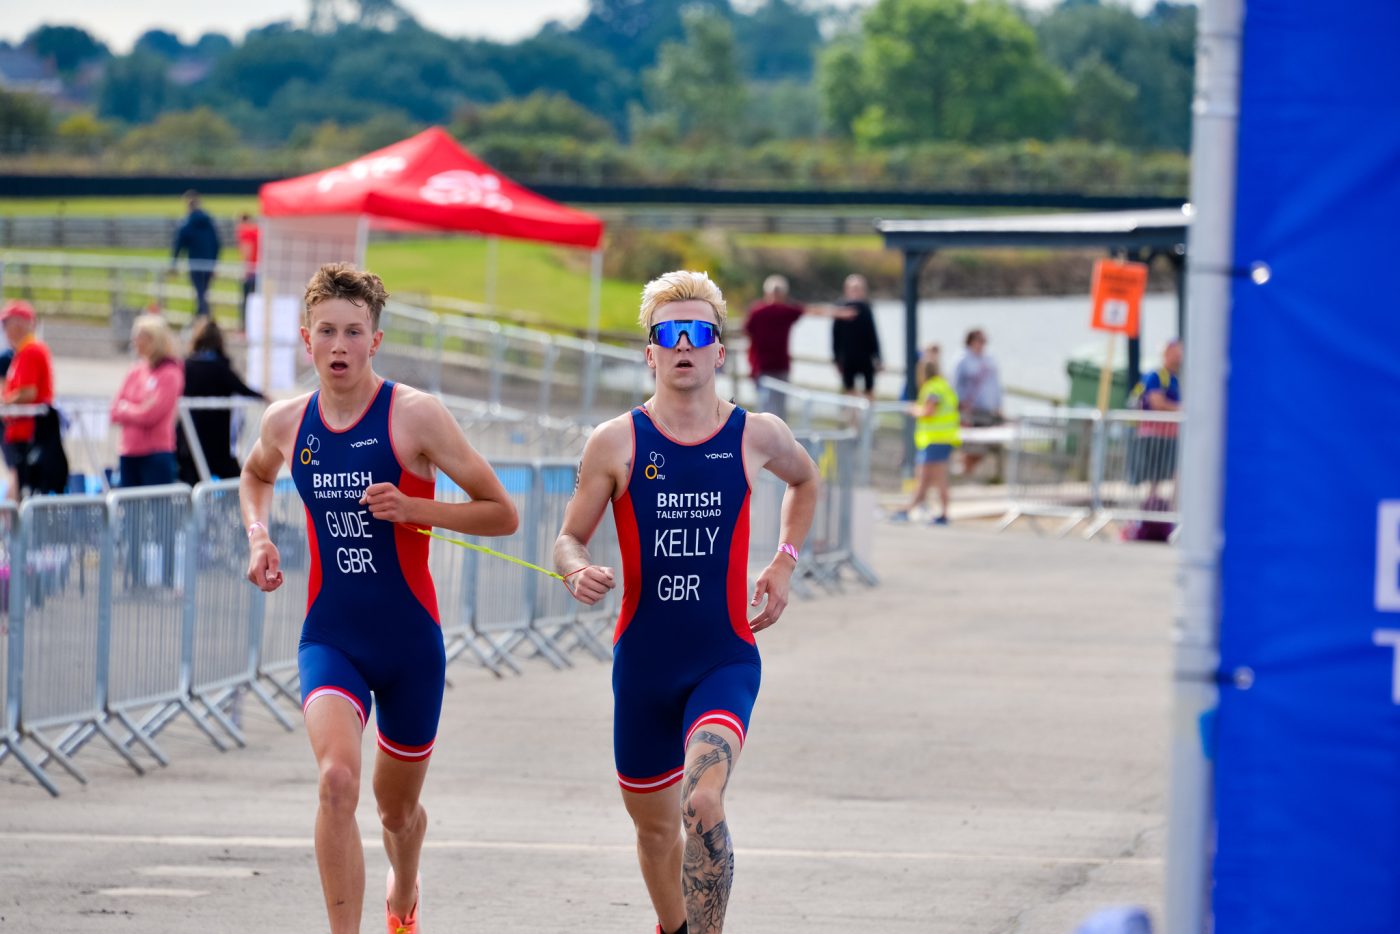 Counting down to the start of the British Triathlon Paratri Super Series